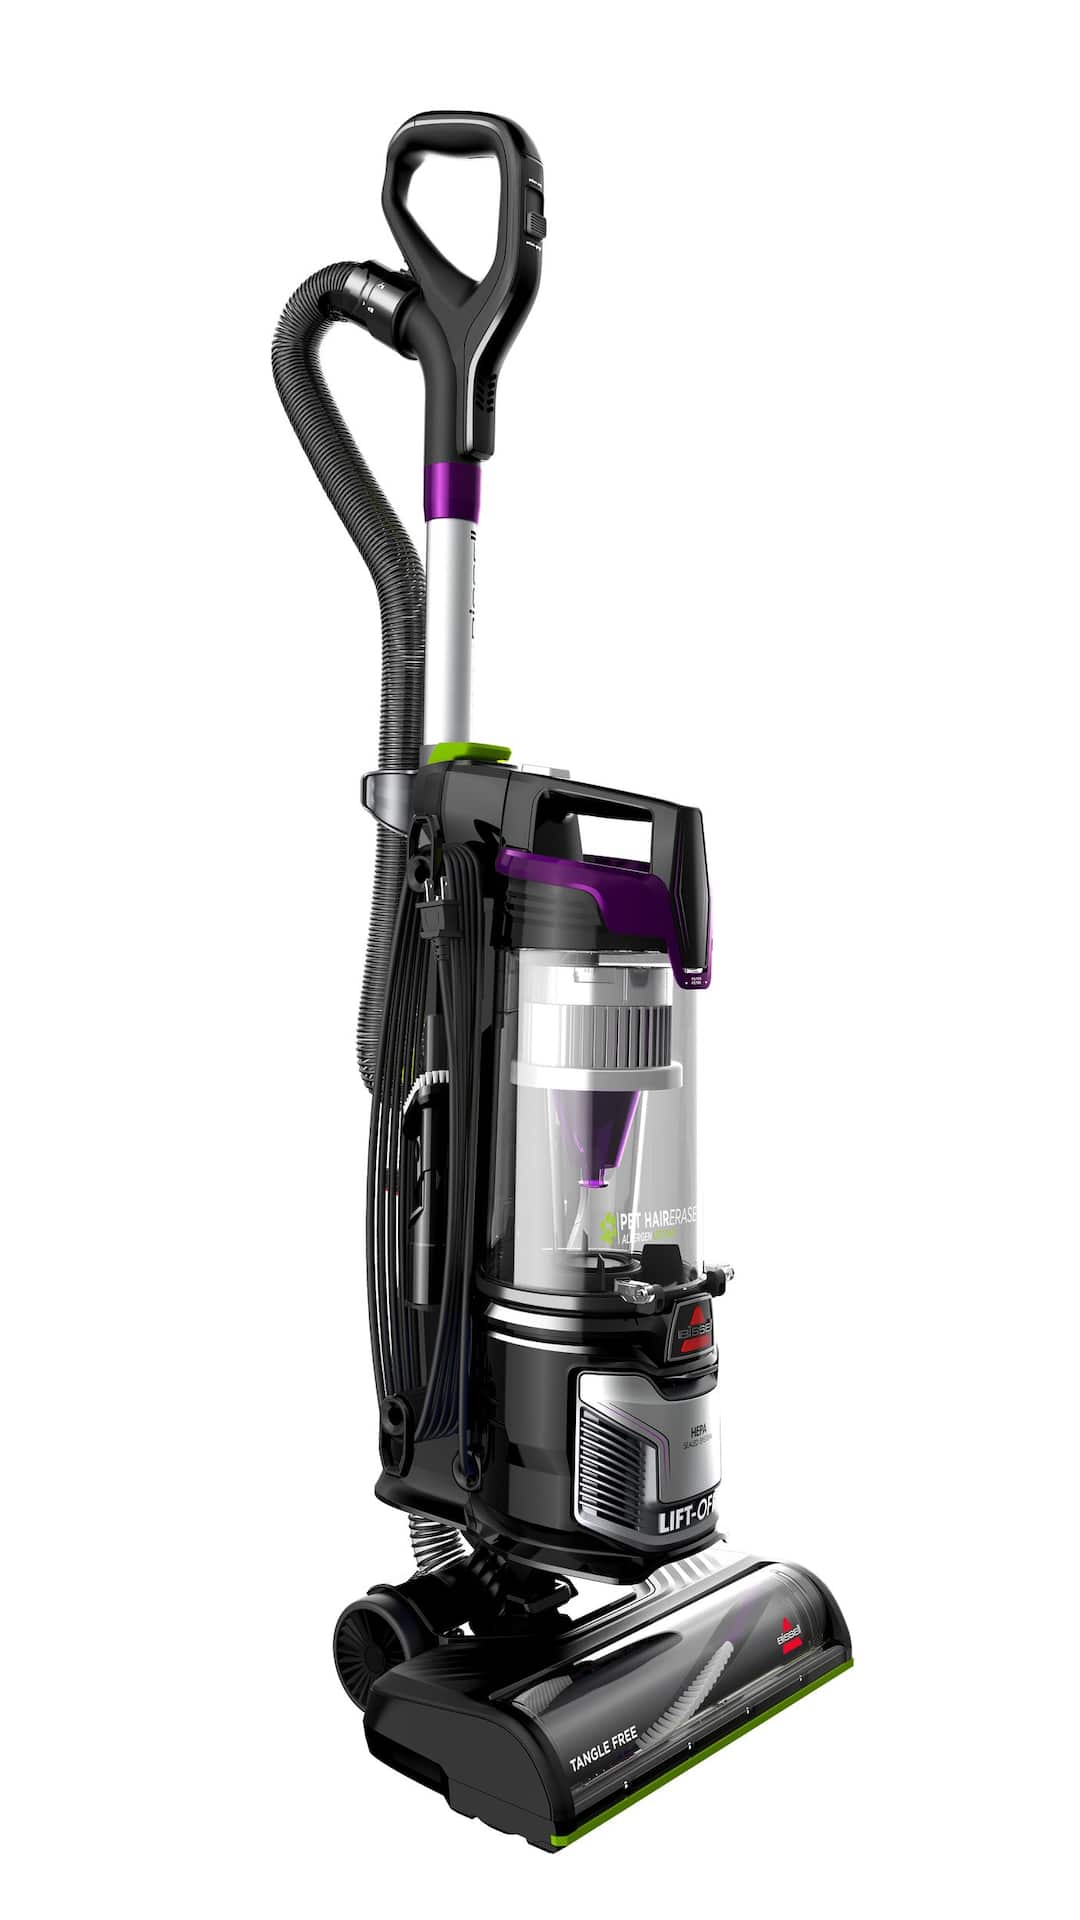 Bissell MultiClean Allergen Pet Lift-Off 2852 Vacuum Cleaner Review -  Consumer Reports